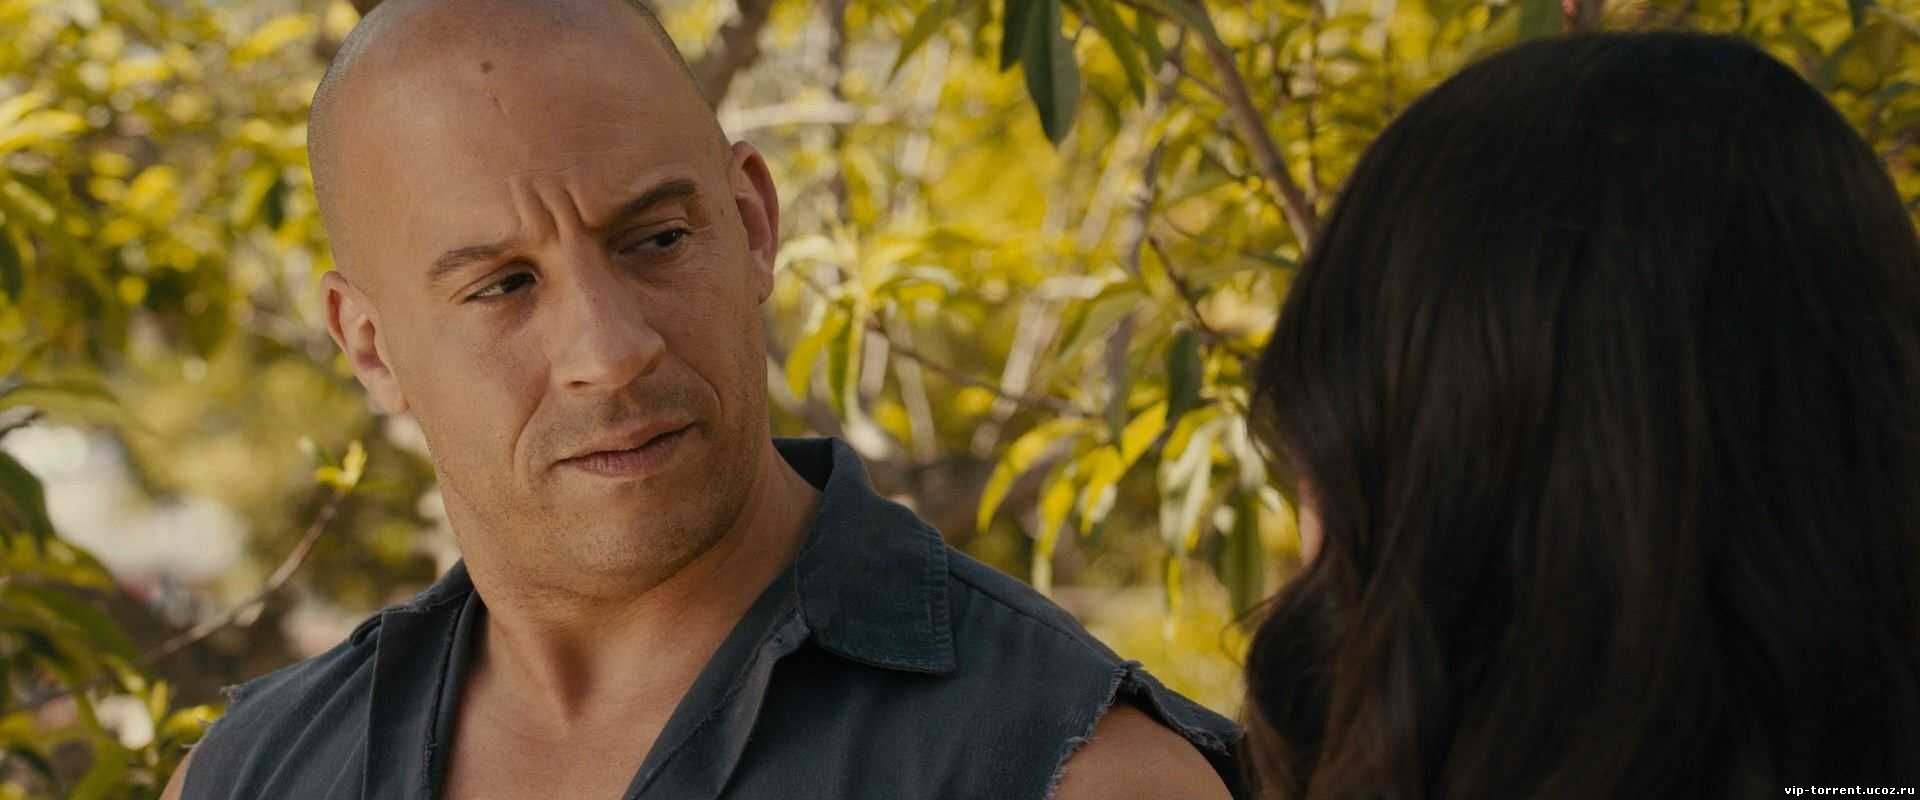 furious 7 yify 1080p torrents